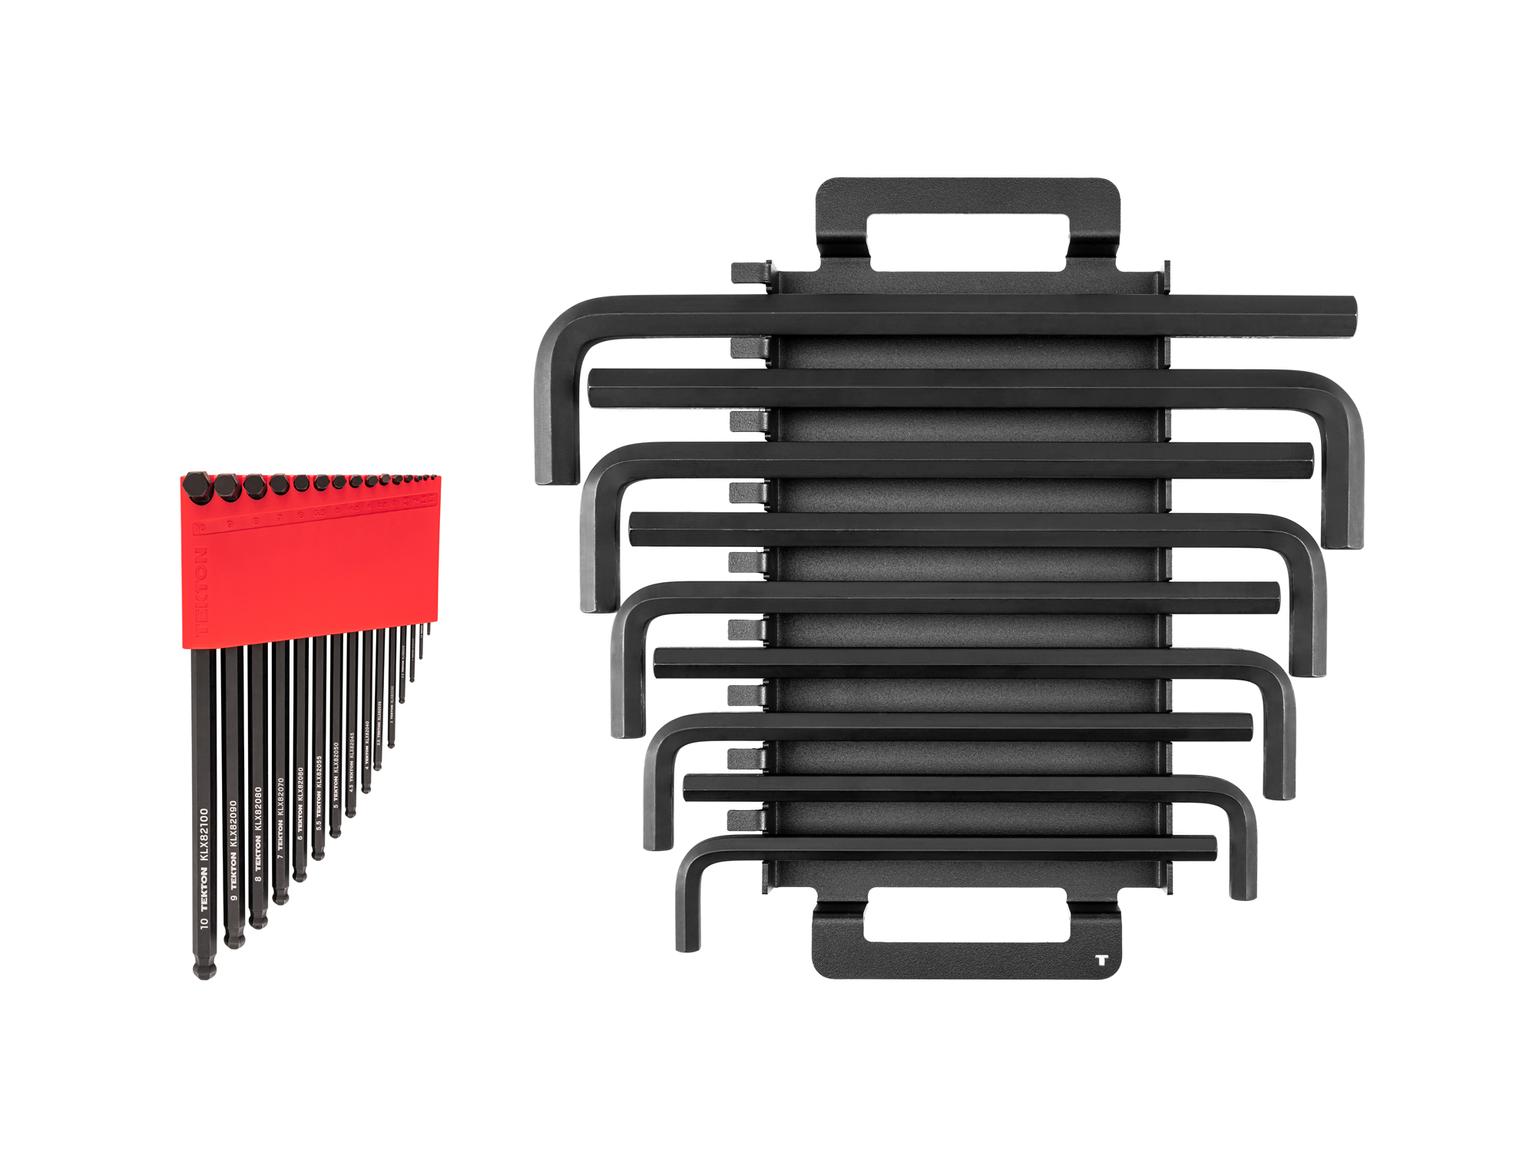 Ball End and Flat End Hex L-Key Set, 24-Piece (Holder and Rack)